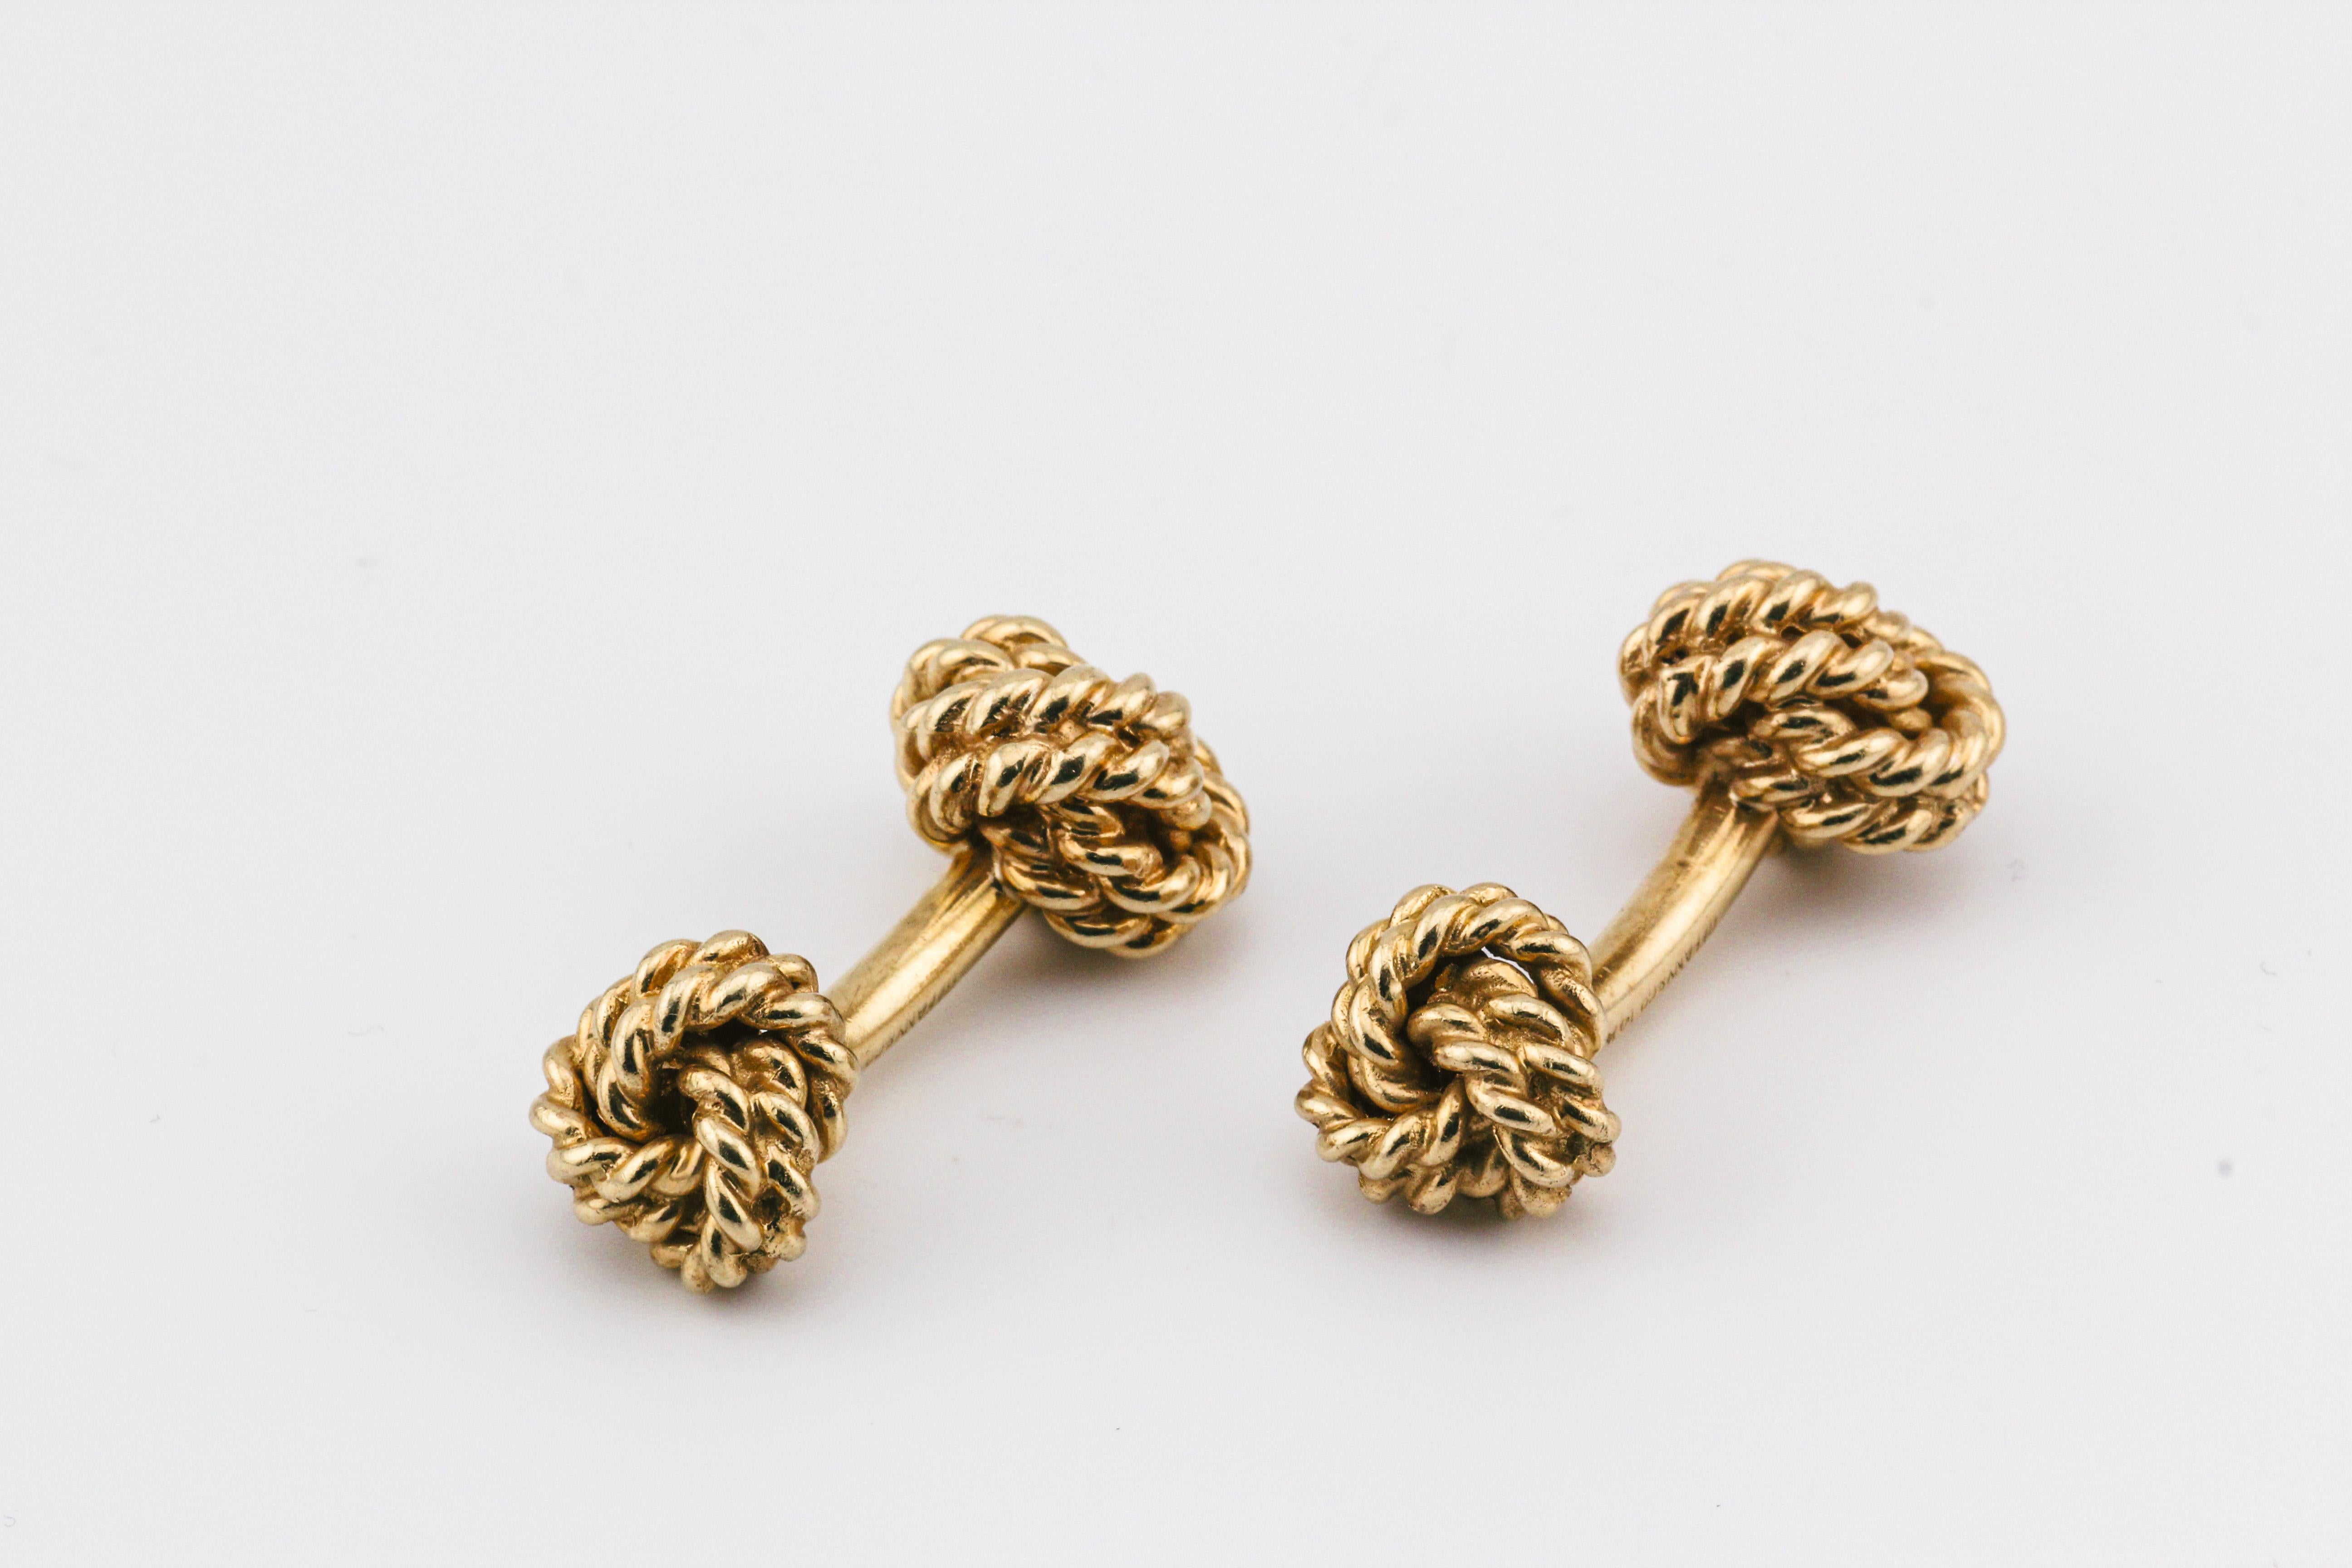 Tiffany & Co. 14k Yellow Gold Rope Knot Cufflinks In Good Condition For Sale In Bellmore, NY